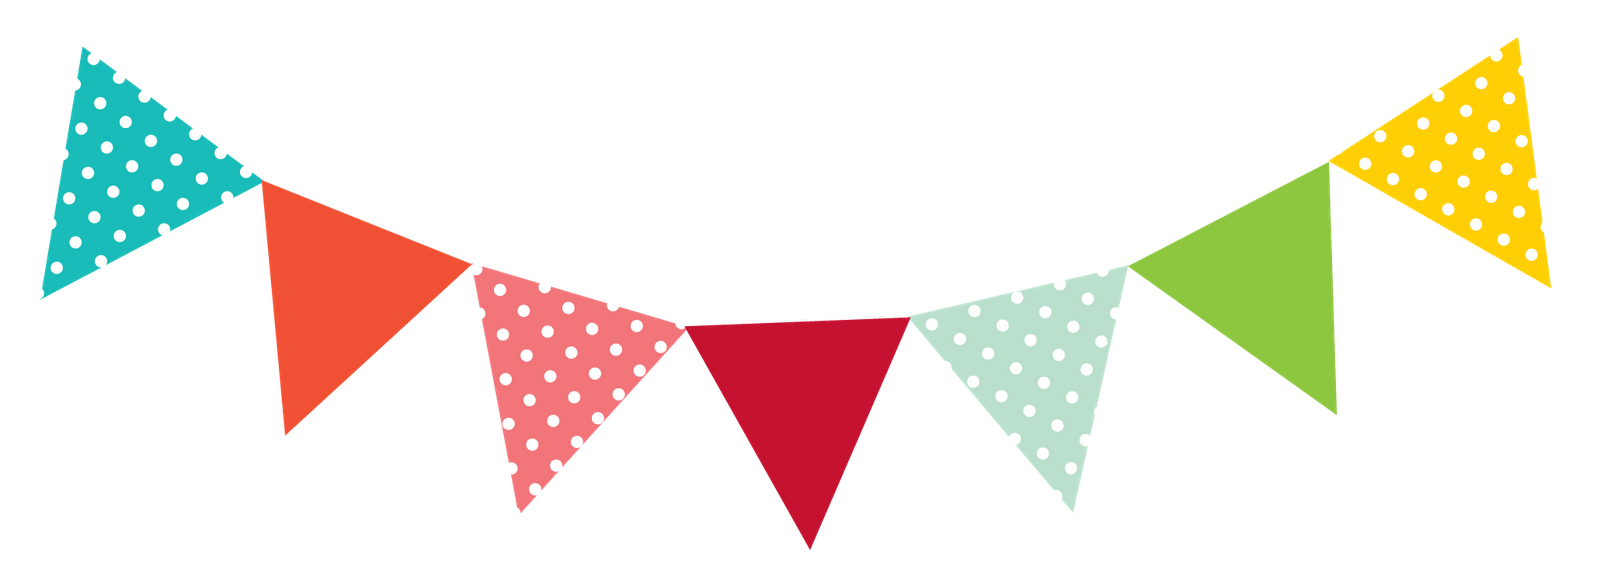 free-pennant-flags-png-download-free-pennant-flags-png-png-images